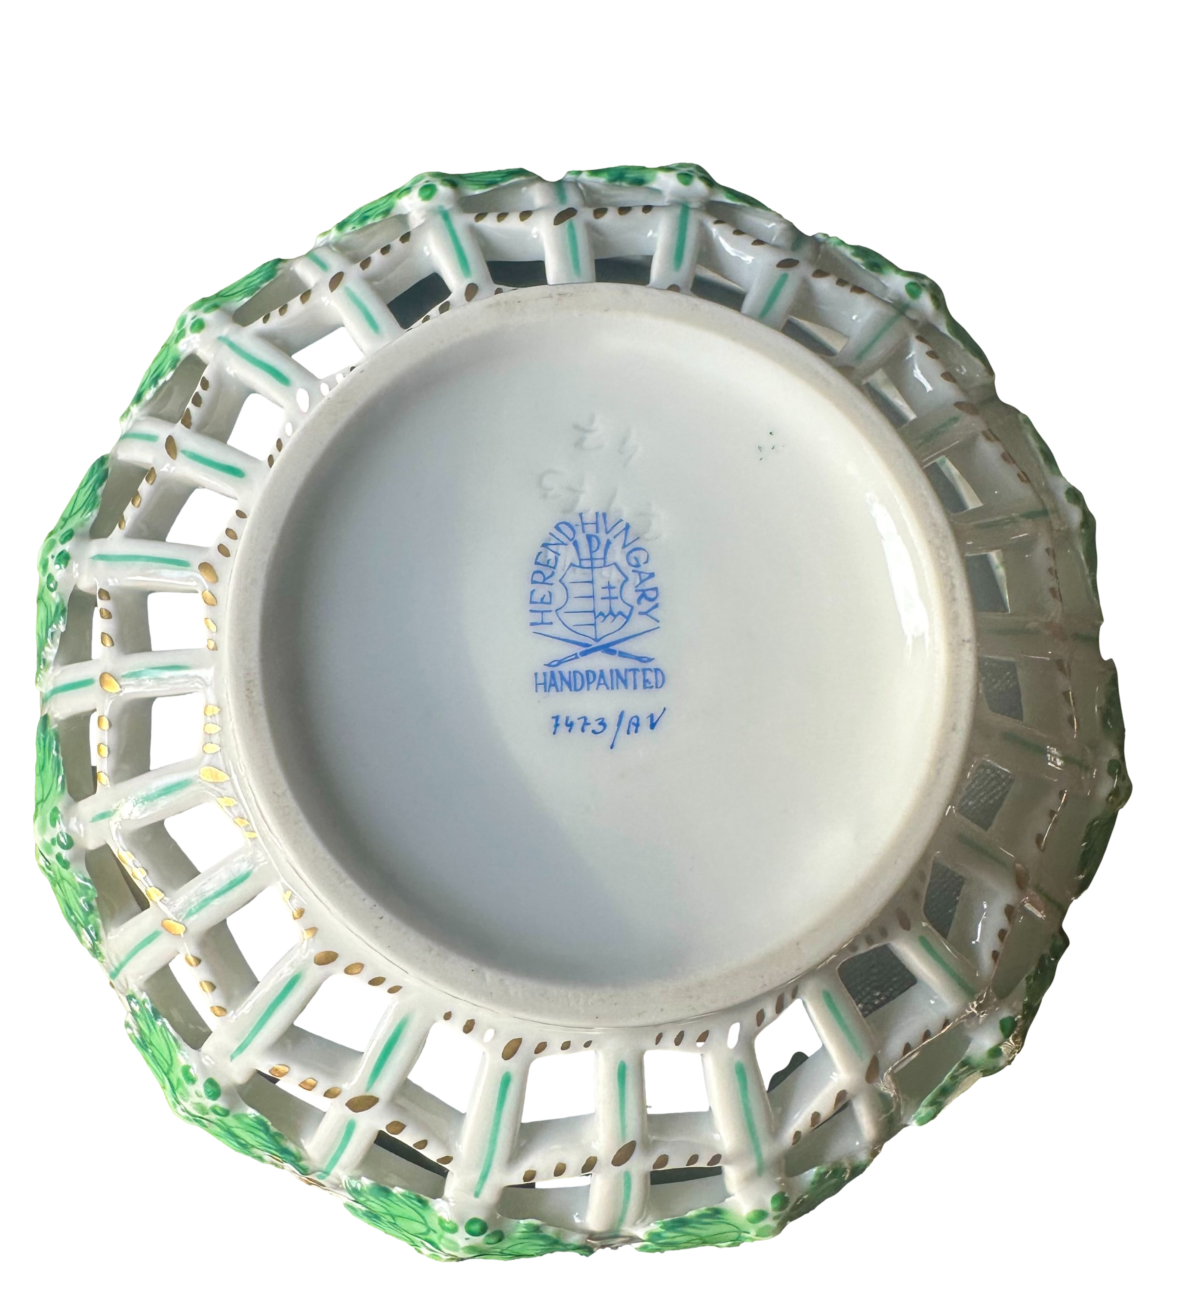 A vintage porcelain hand-painted bowl of lattice open work design by Herend of Hungary. Photo of base of bowl showing the makers stamp.